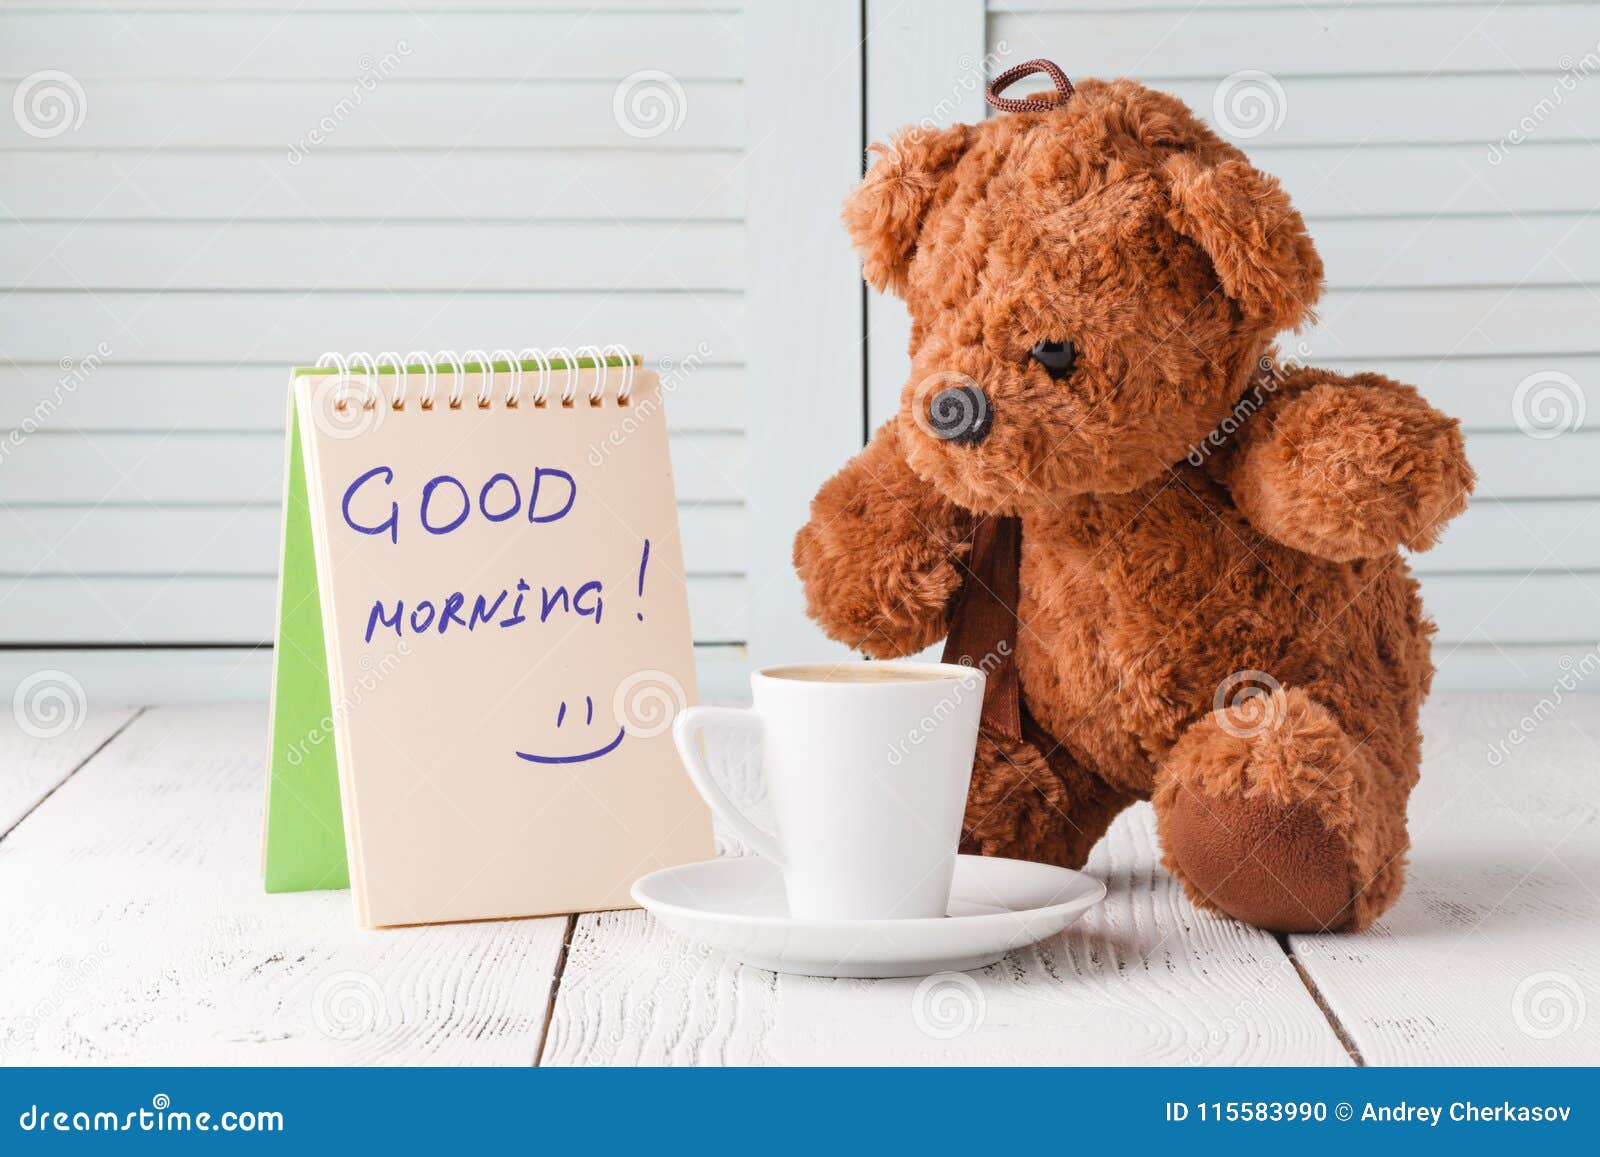 Good Morning with Teddy Bear Stock Photo - Image of love, cute ...